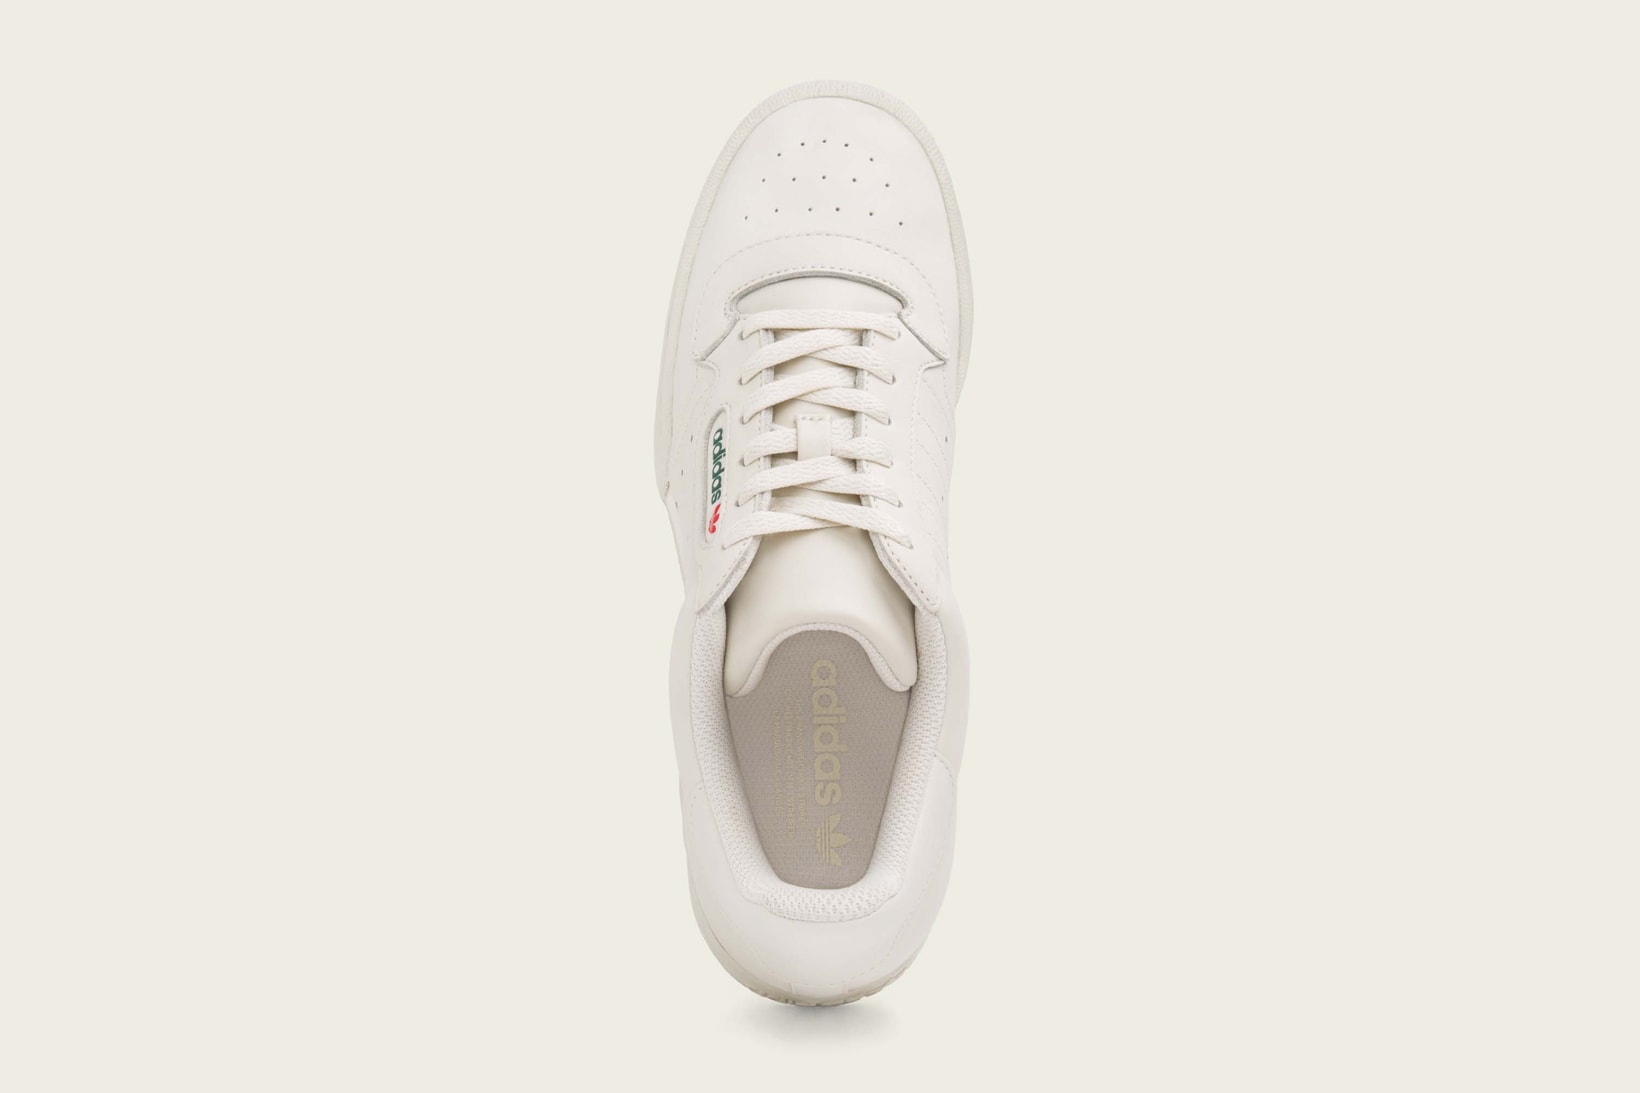 adidas YEEZY Powerphase Official Images